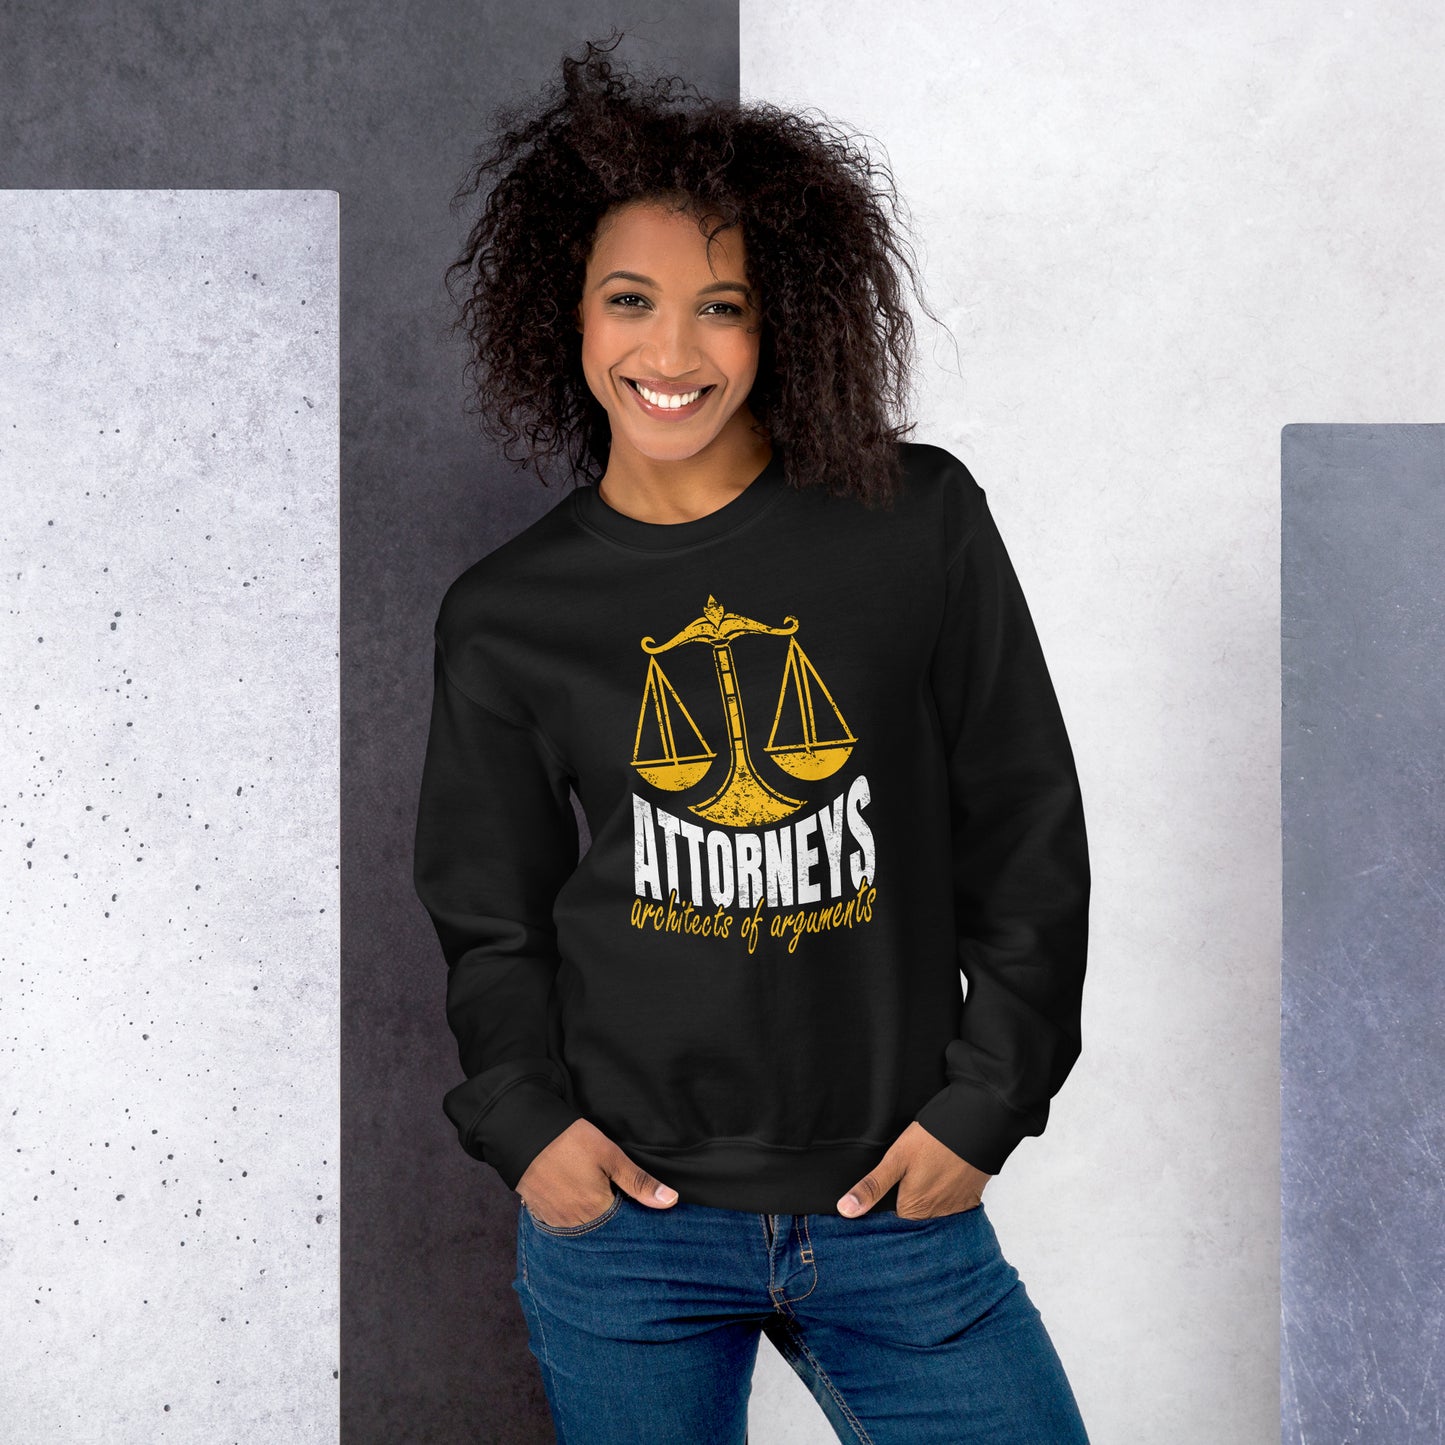 Attorneys architects of arguments Pullover